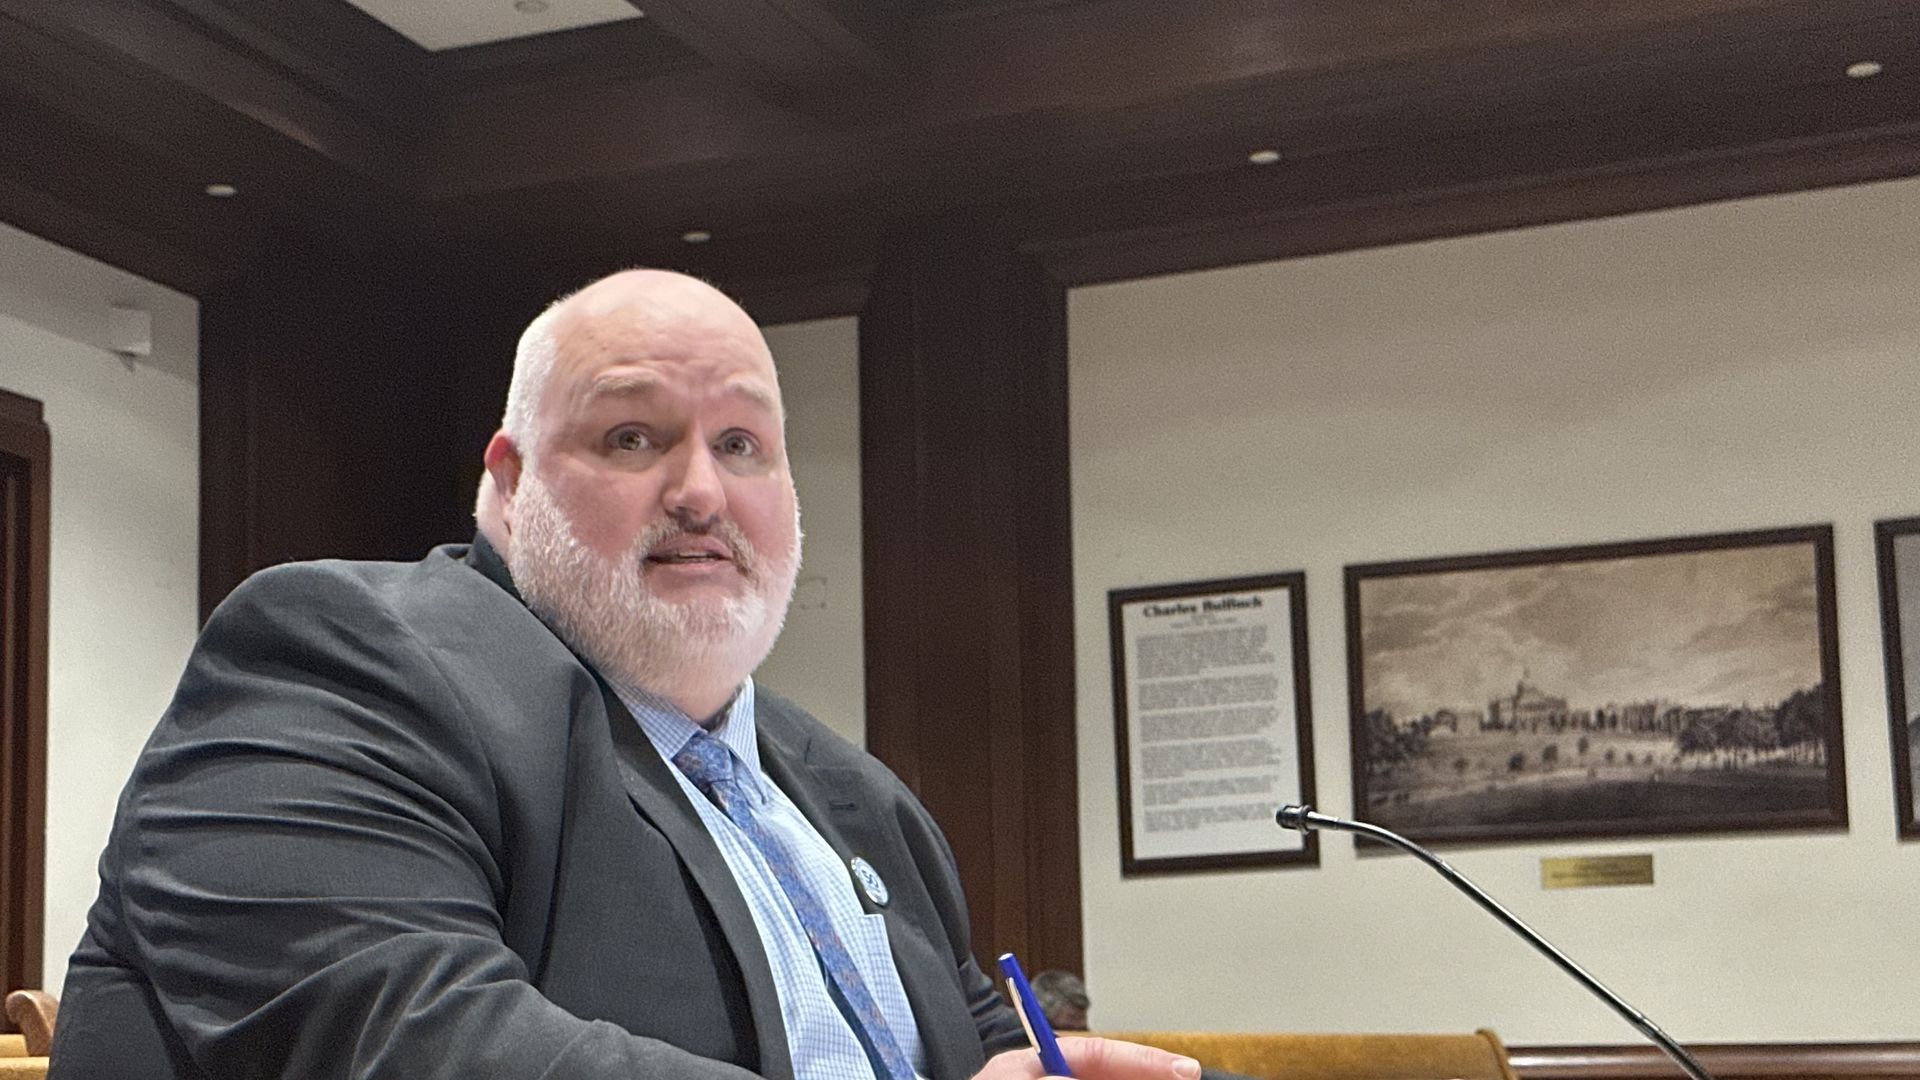 Mark Bracken, interim executive director of the lottery, sits at a table in a Massachusetts State House room while testifying during a legislative hearing.